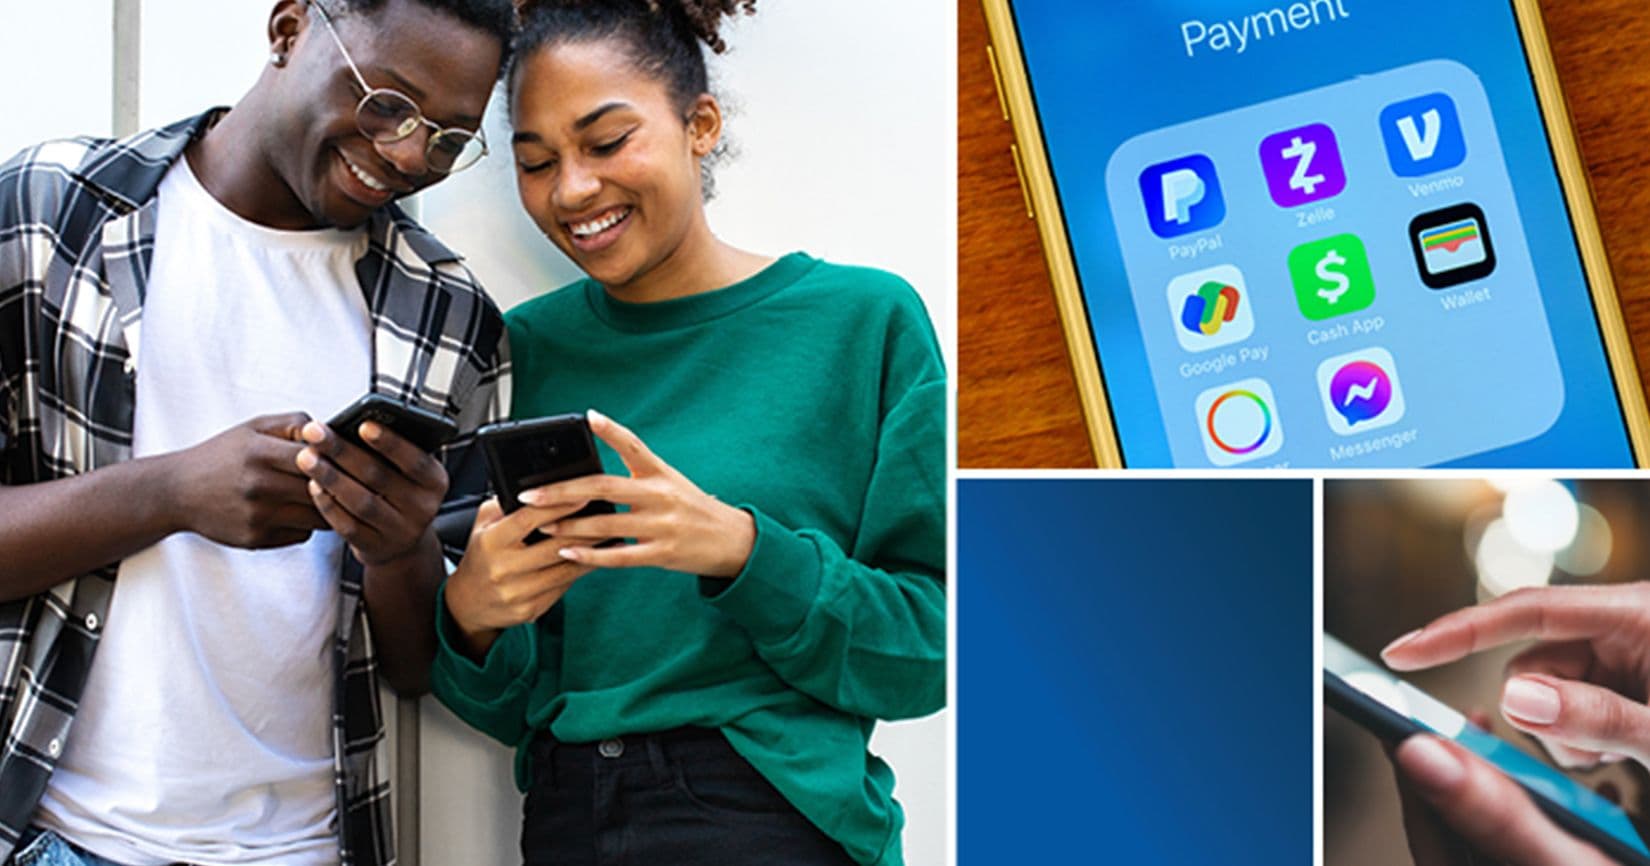 "2023 Eye on Payments: Part 1 — Mobile Wallets Grow in Popularity, while a Divergence Between Generational Preferences Is Impacting Payment Decisions post thumbnail"